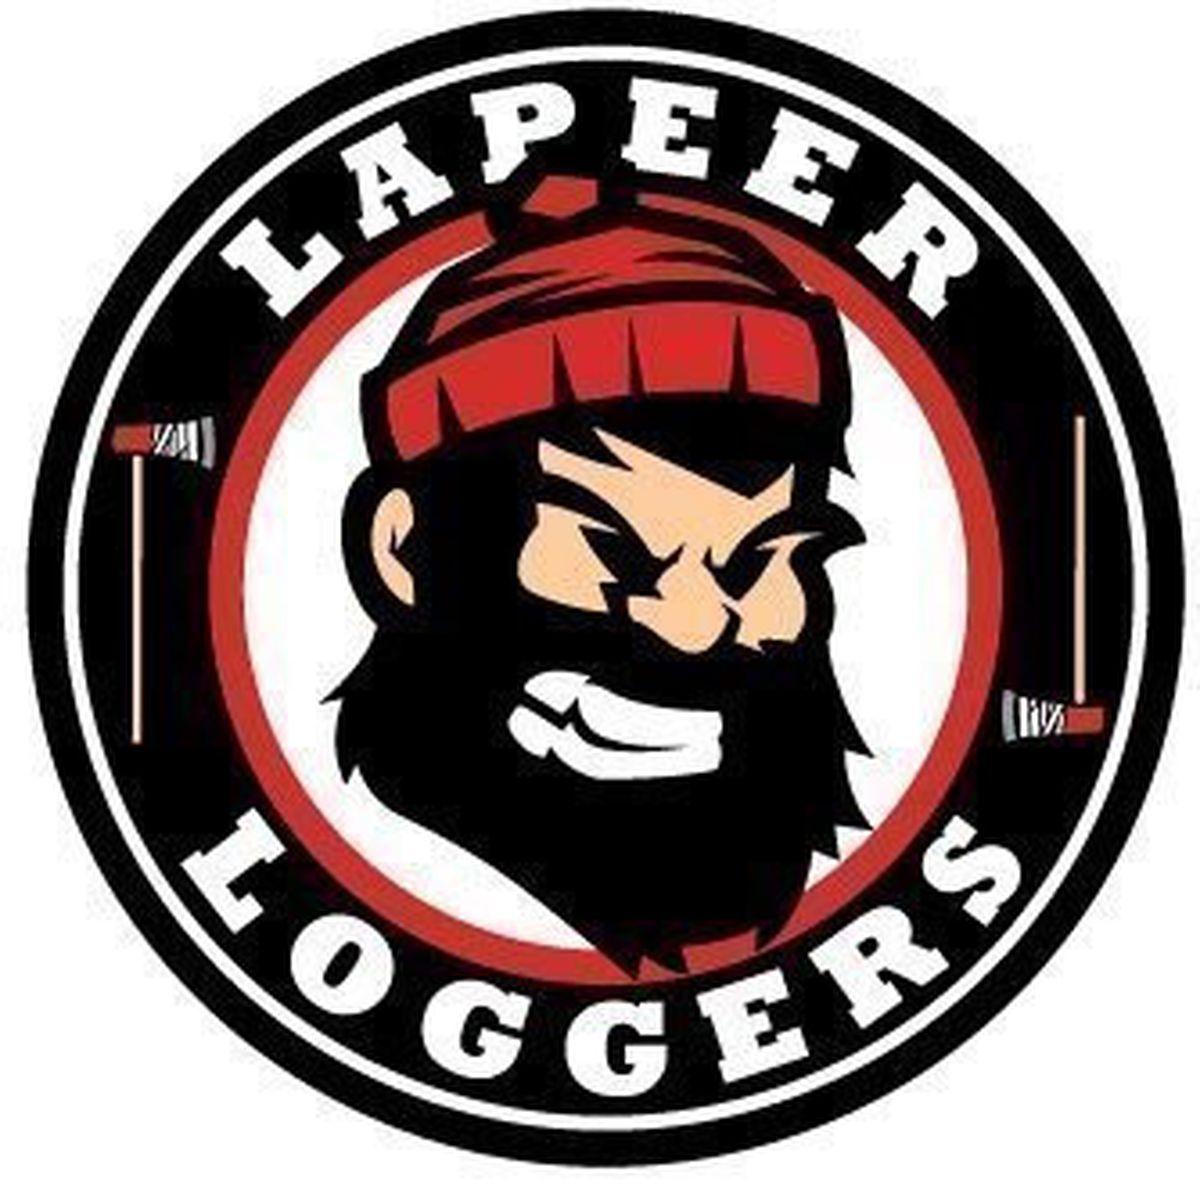 Loggers Logo - Lapeer Loggers Near Sellout For Opener Inflates All American Hockey